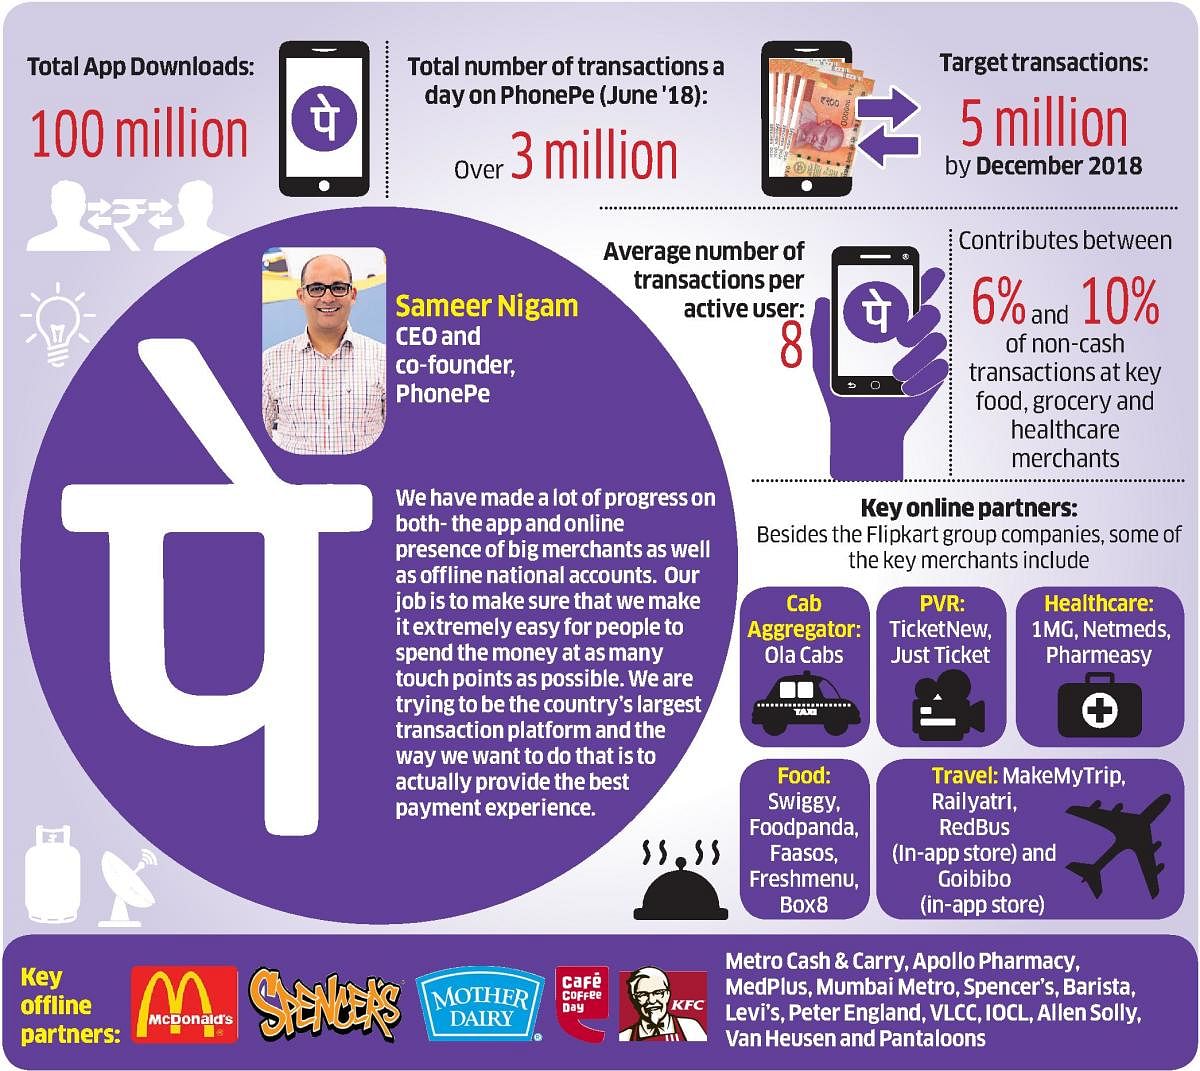 PhonePe, founded in December 2015, was acquired by Flipkart in the following year. With 111 million transactions in July, and with $20 billion annualised total payment volume (TPV) run rate, the company is growing aggressively.